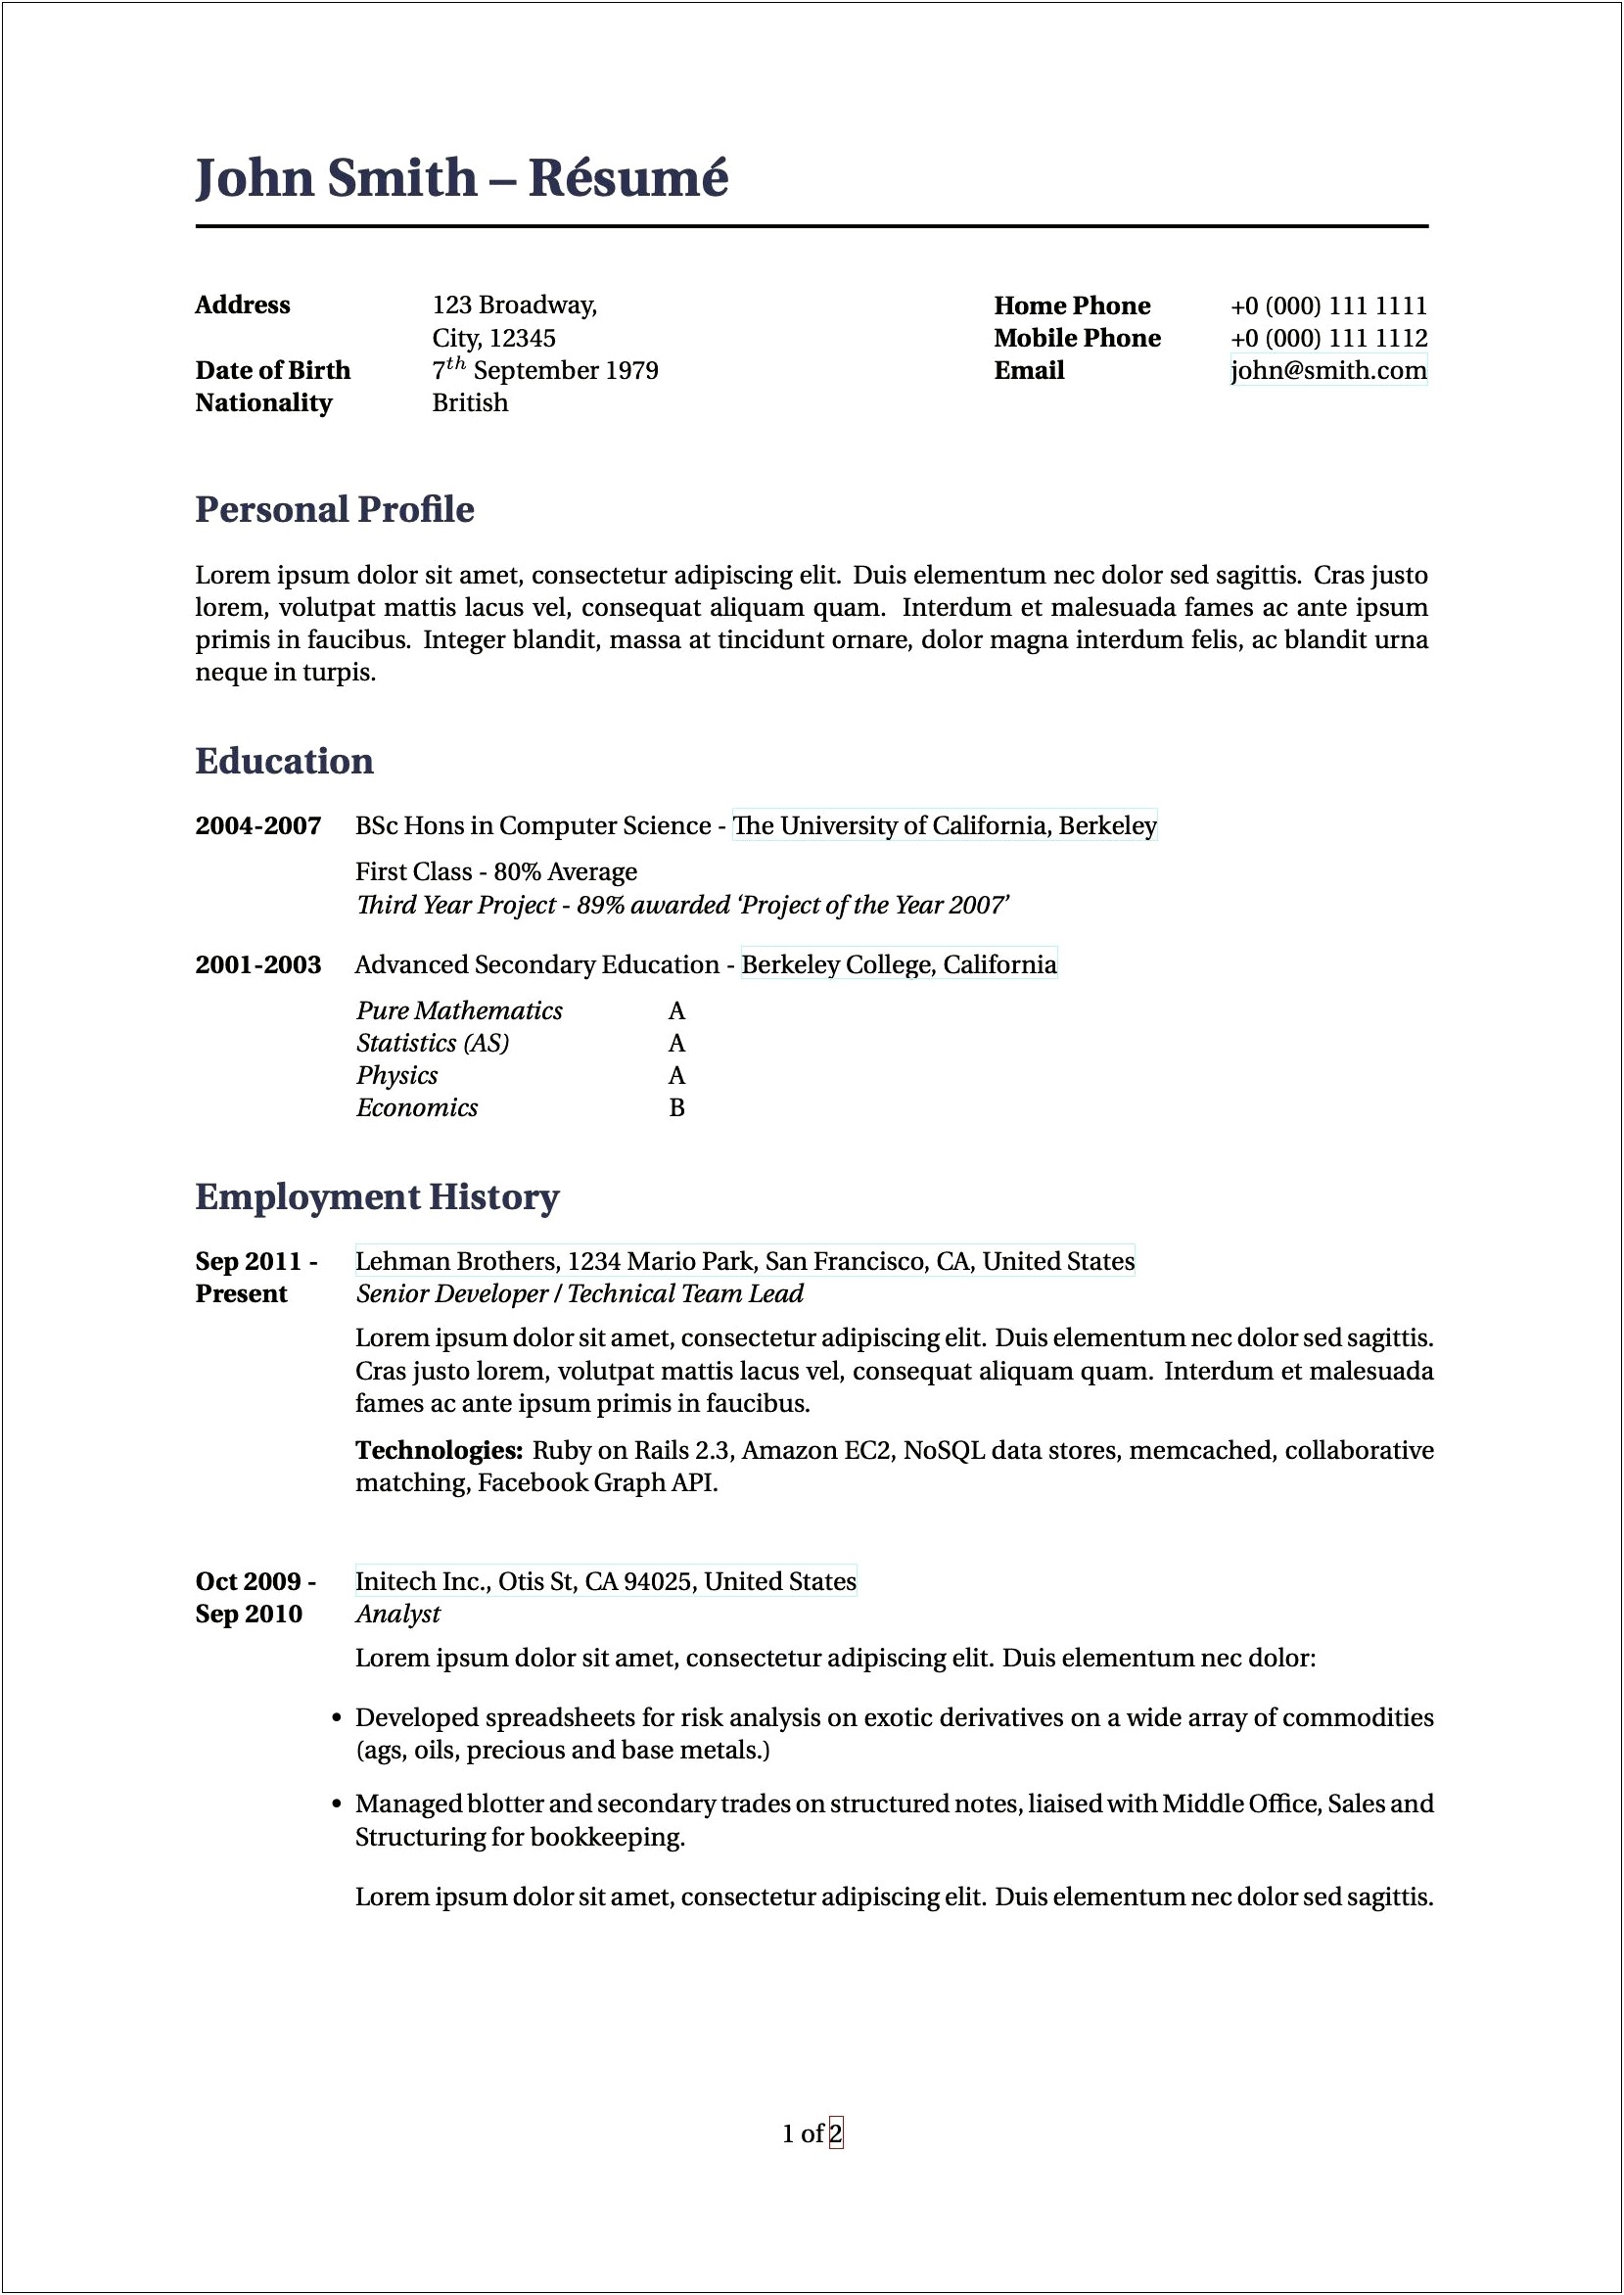 2nd Job Out Of College Resume